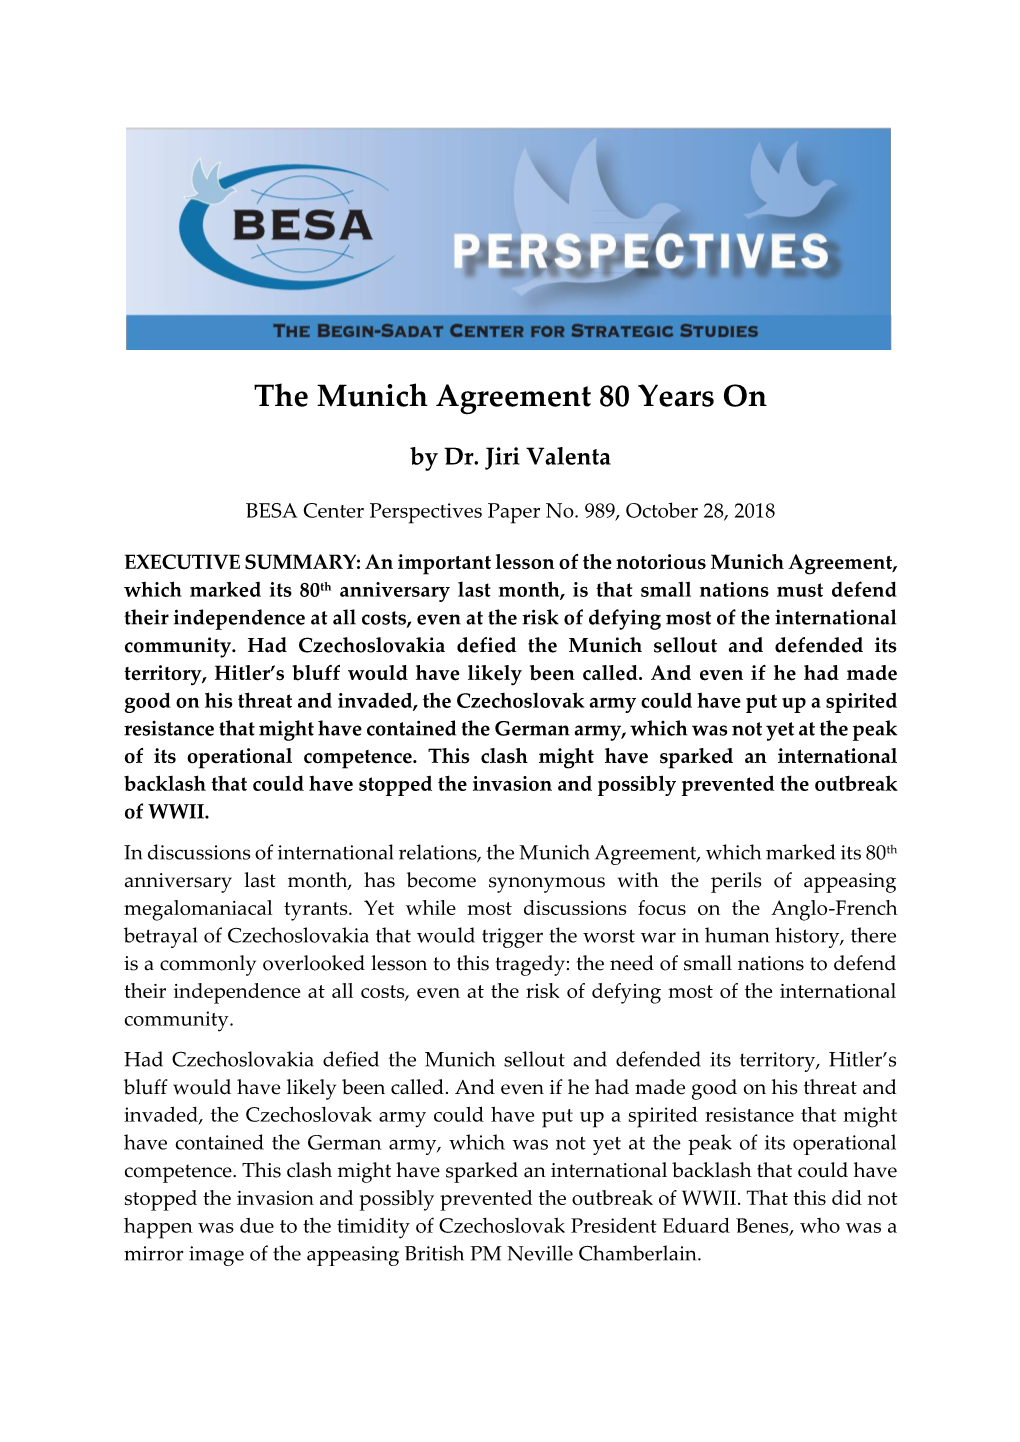 The Munich Agreement 80 Years On